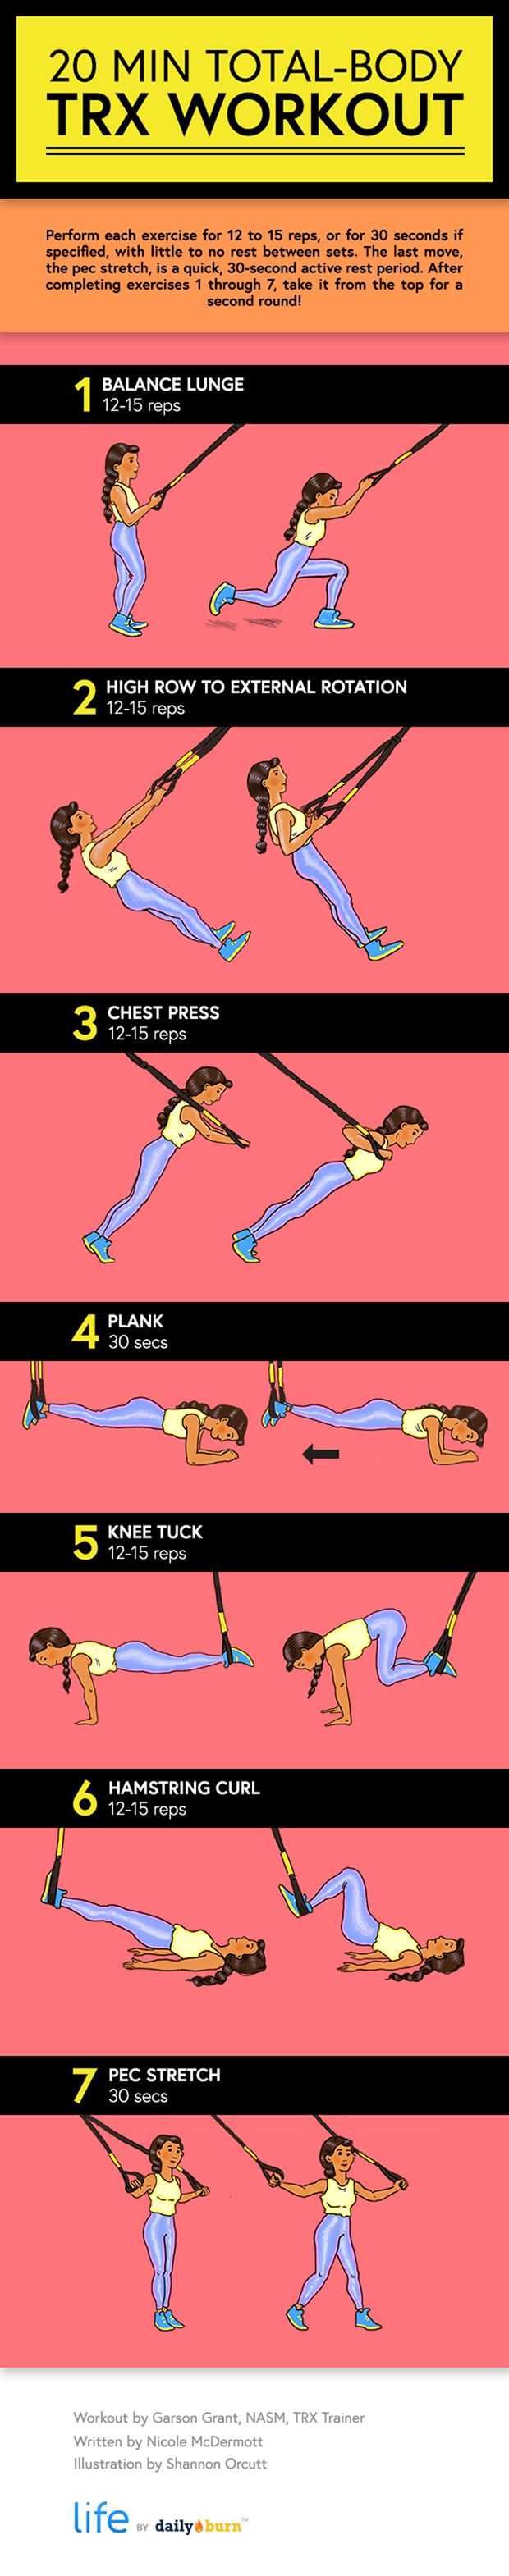 20-Minute Total-Body TRX Workout